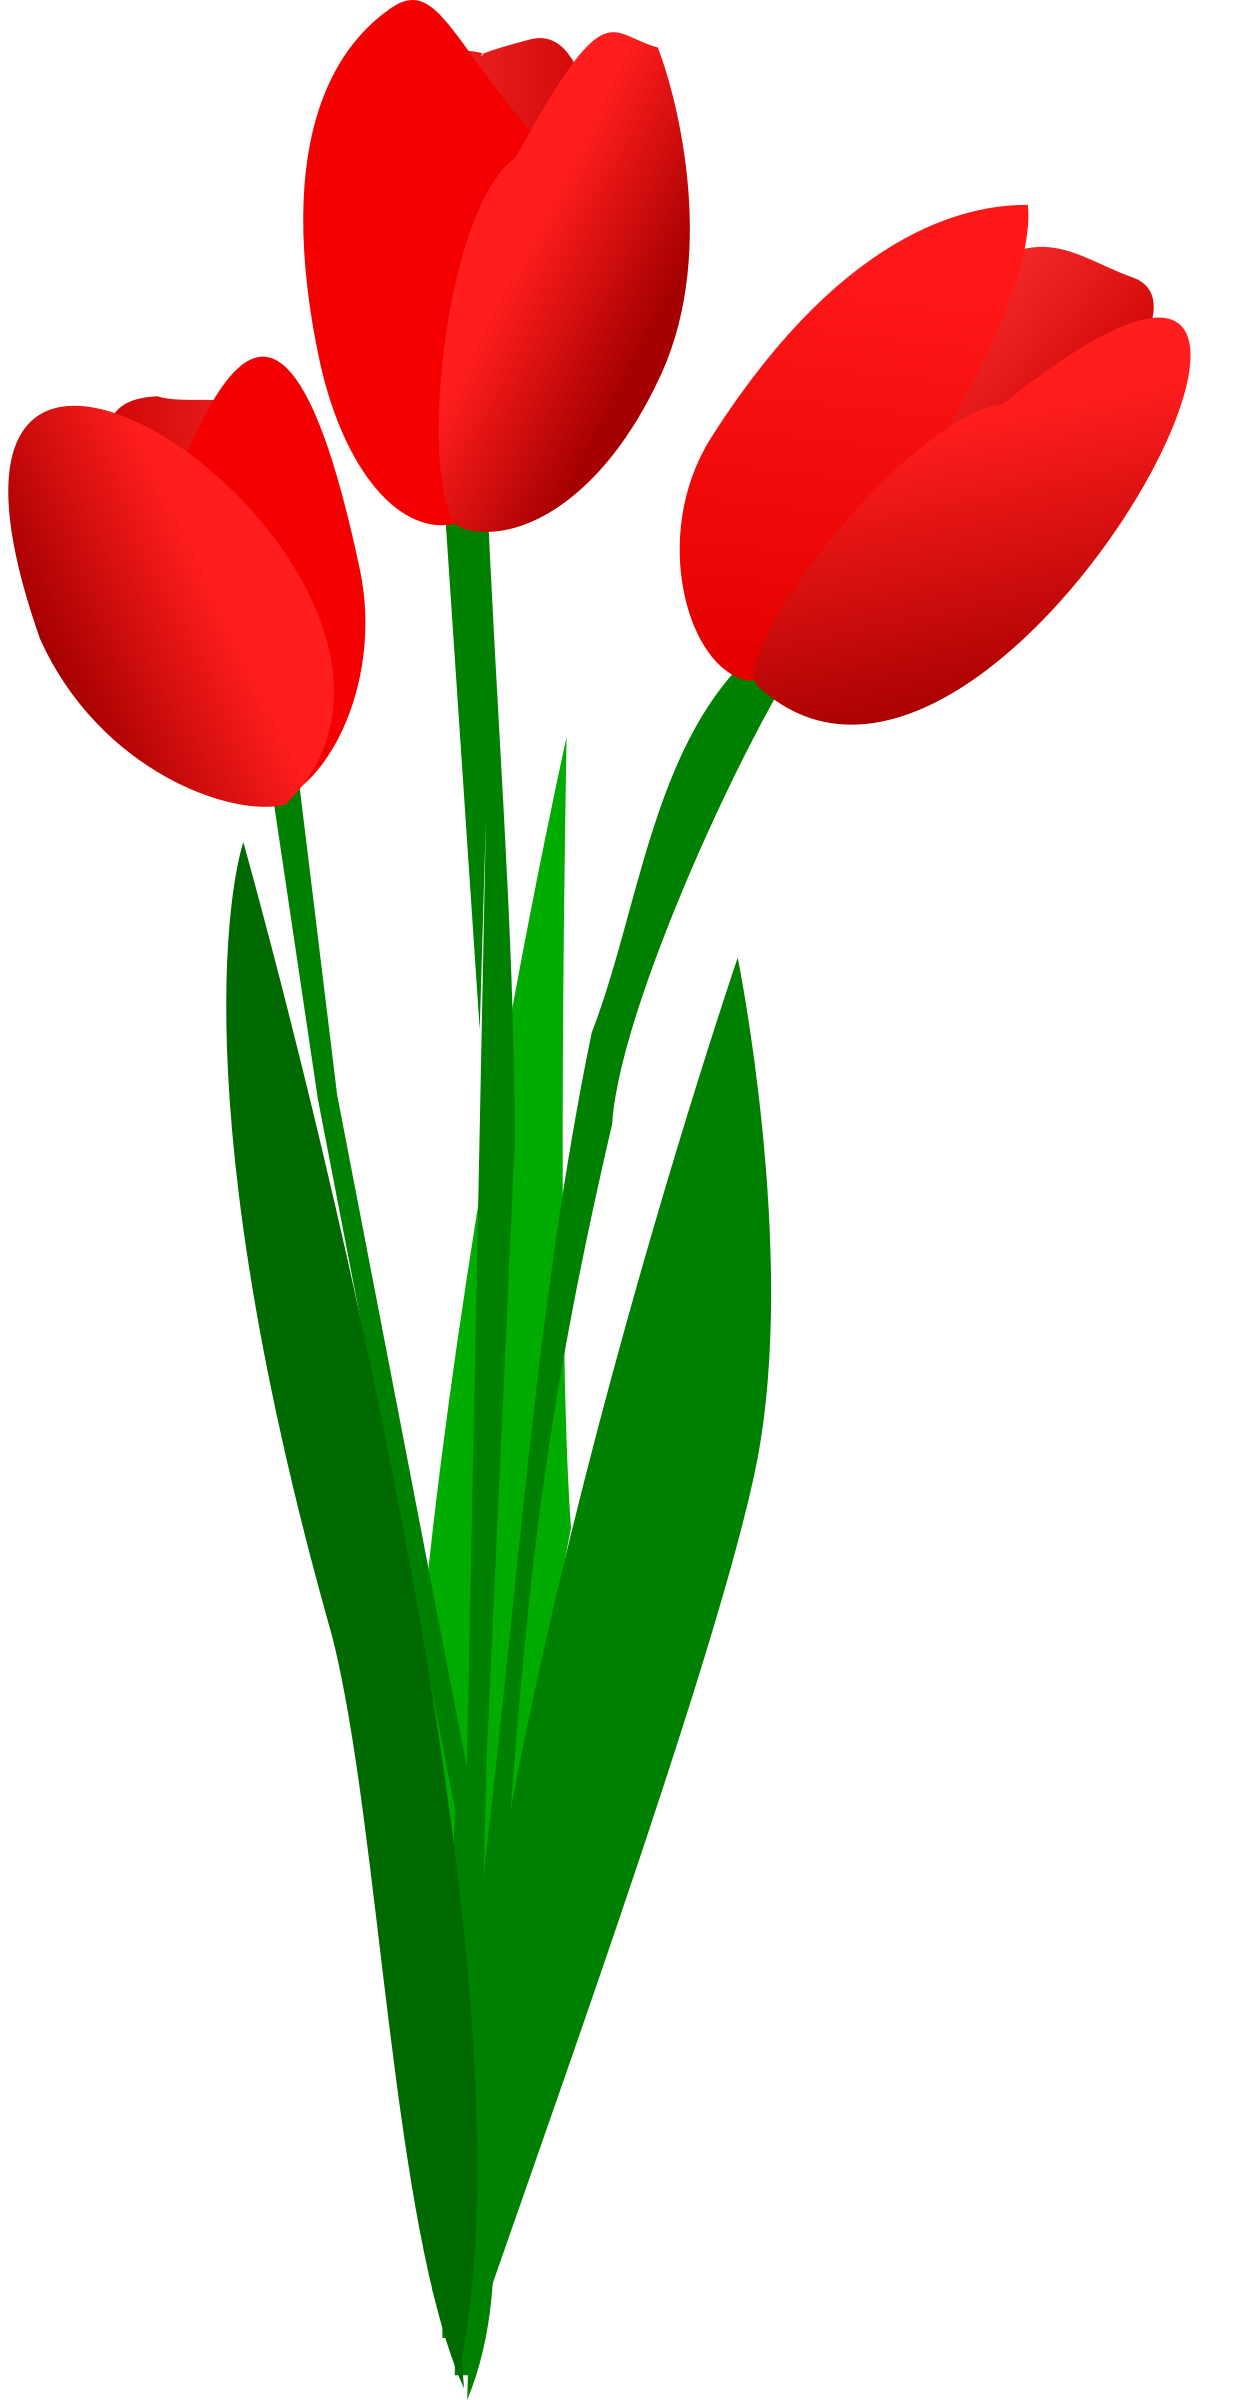 Easter clipart tulip. Three red tulips hoa